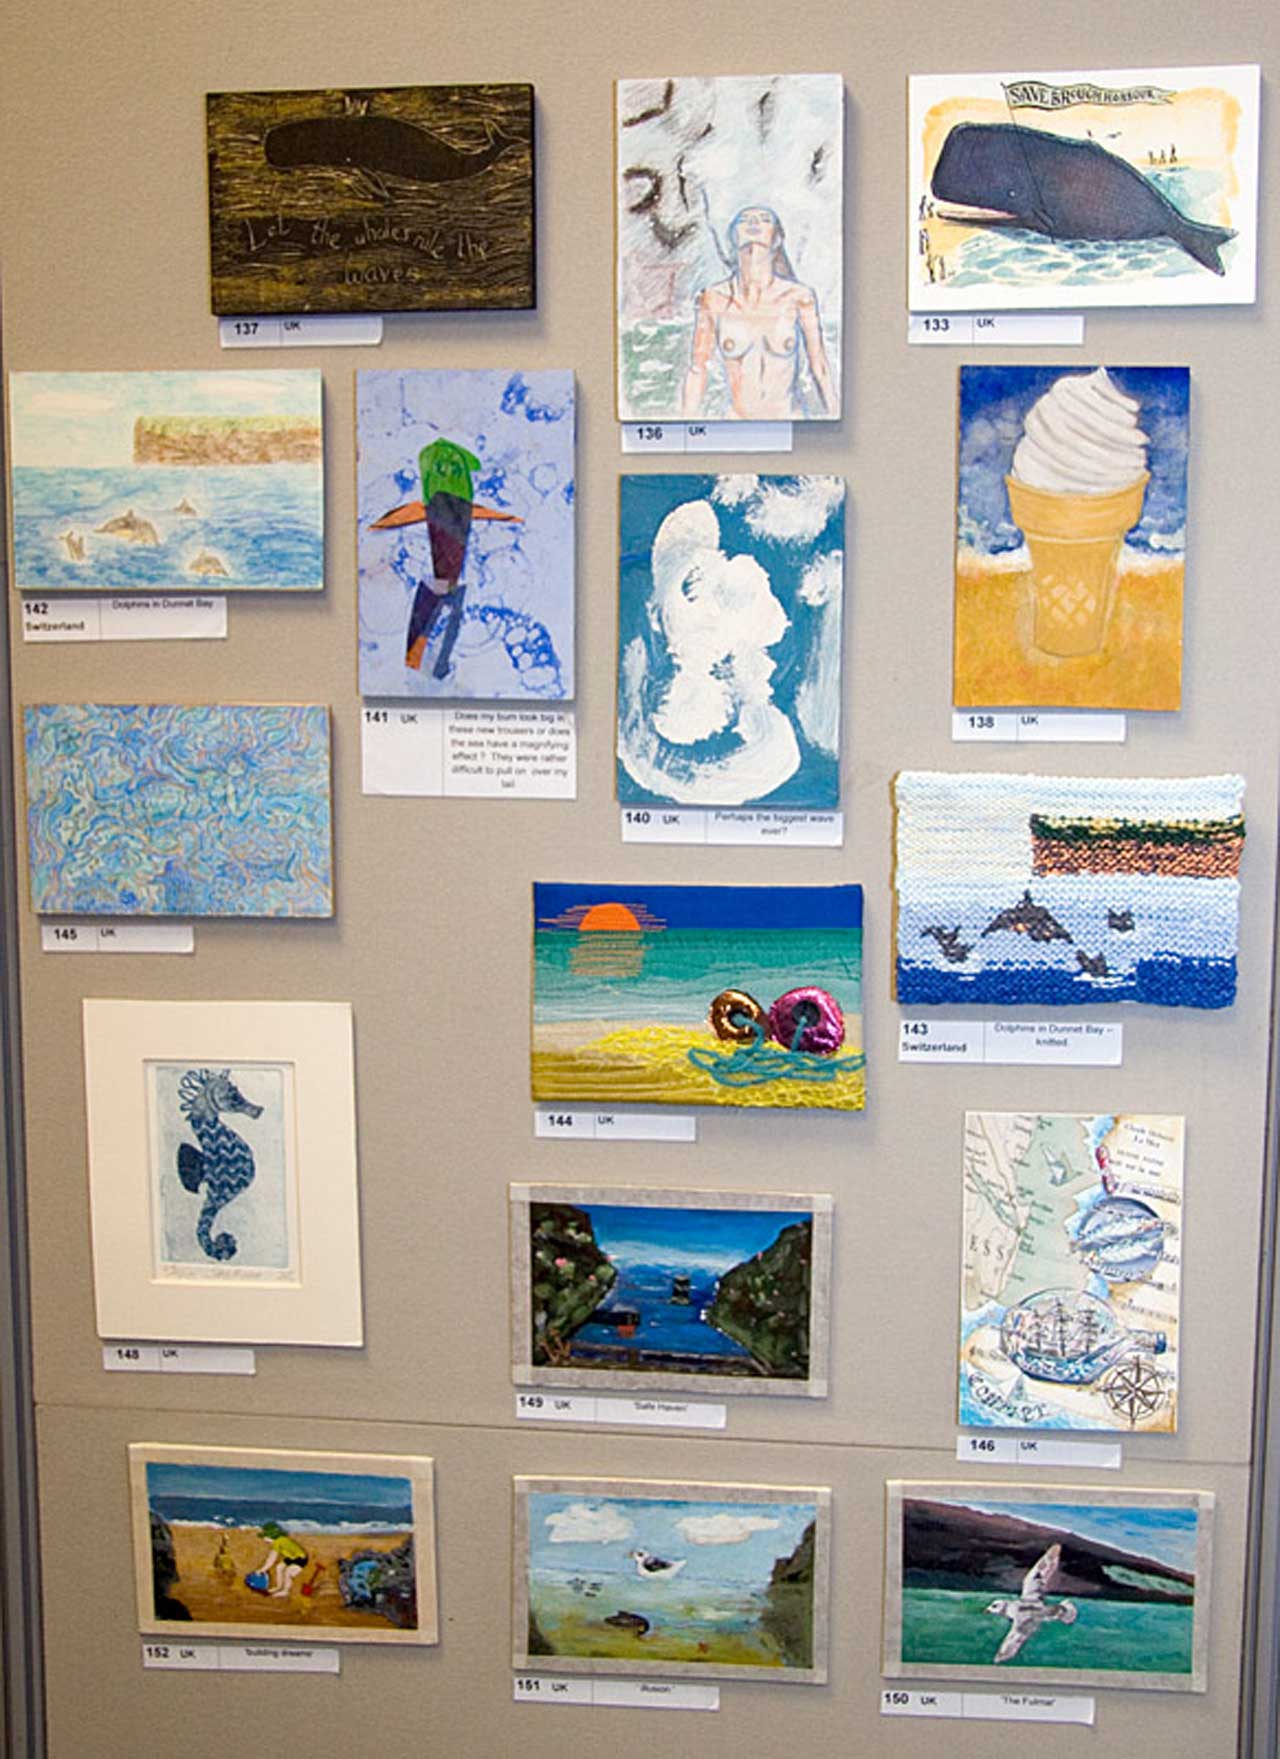 Photo: Postcard SEA Fundraiser and Exhibition Launched